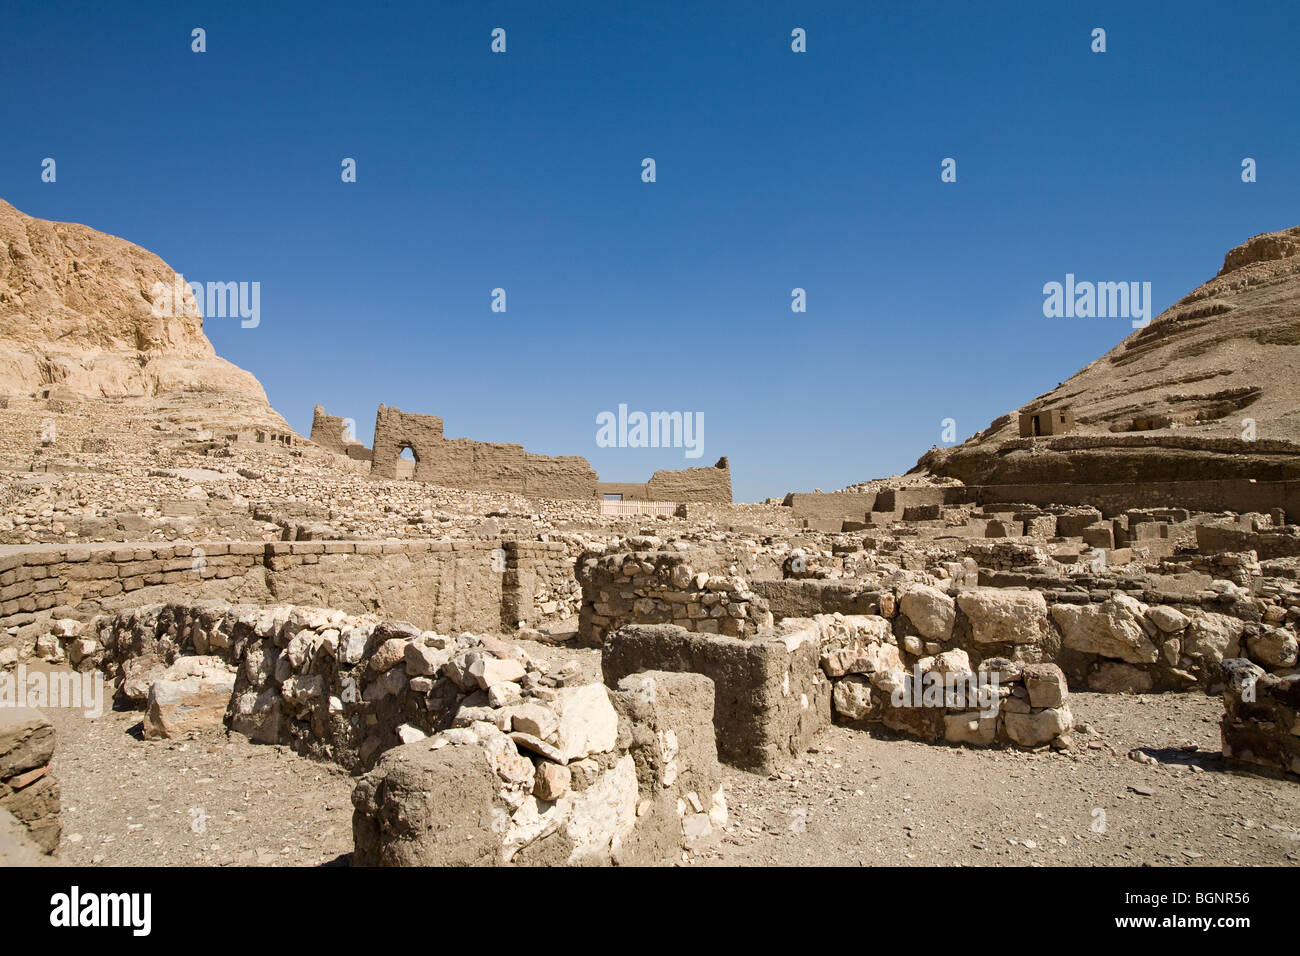 The walls of houses in Deir el-Medina, worker's village near Valley of The Kings, West Bank of Nile, Luxor, Egypt Stock Photo